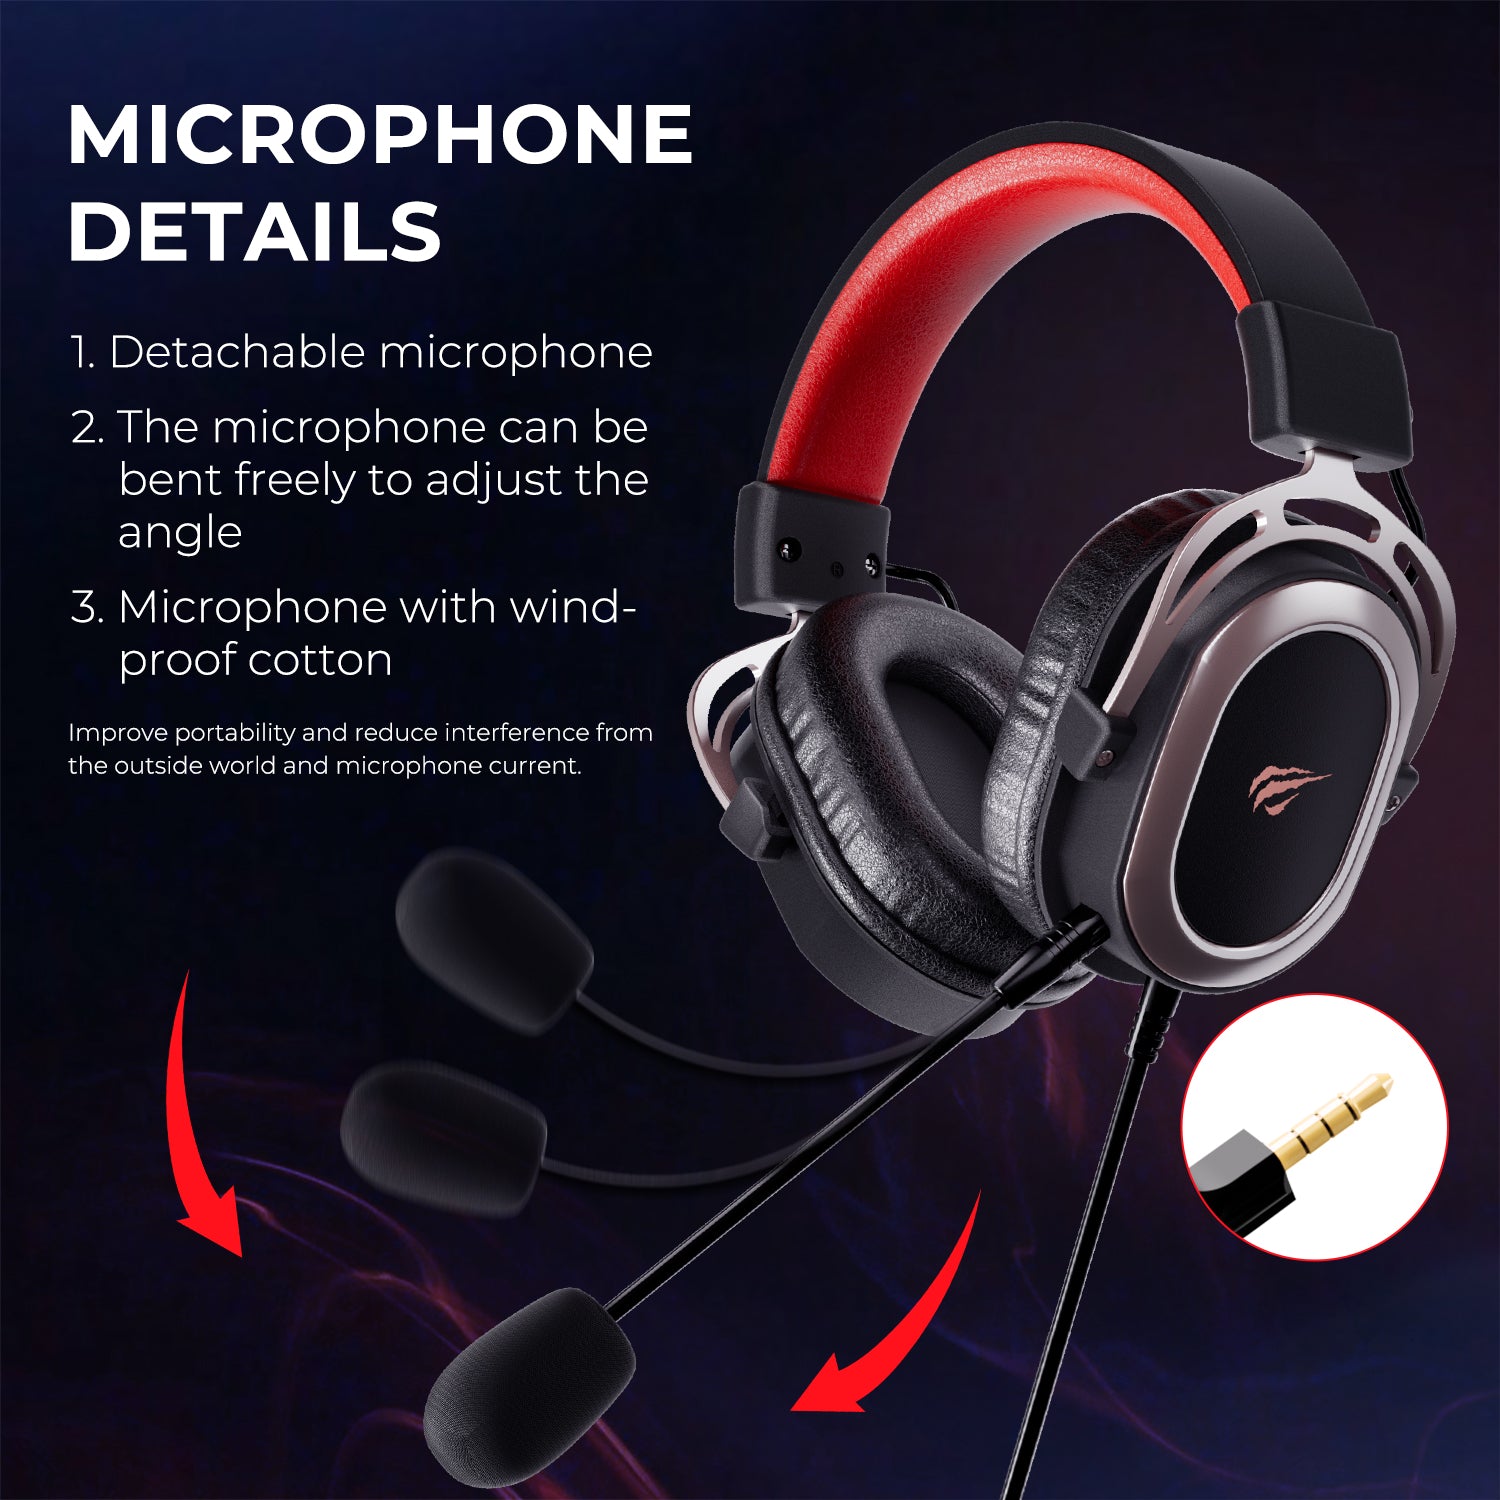 HAVIT H2008D Wired Gaming Headset with 3.5mm Plug 50mm Drivers Surround Sound HD Detachable Mic